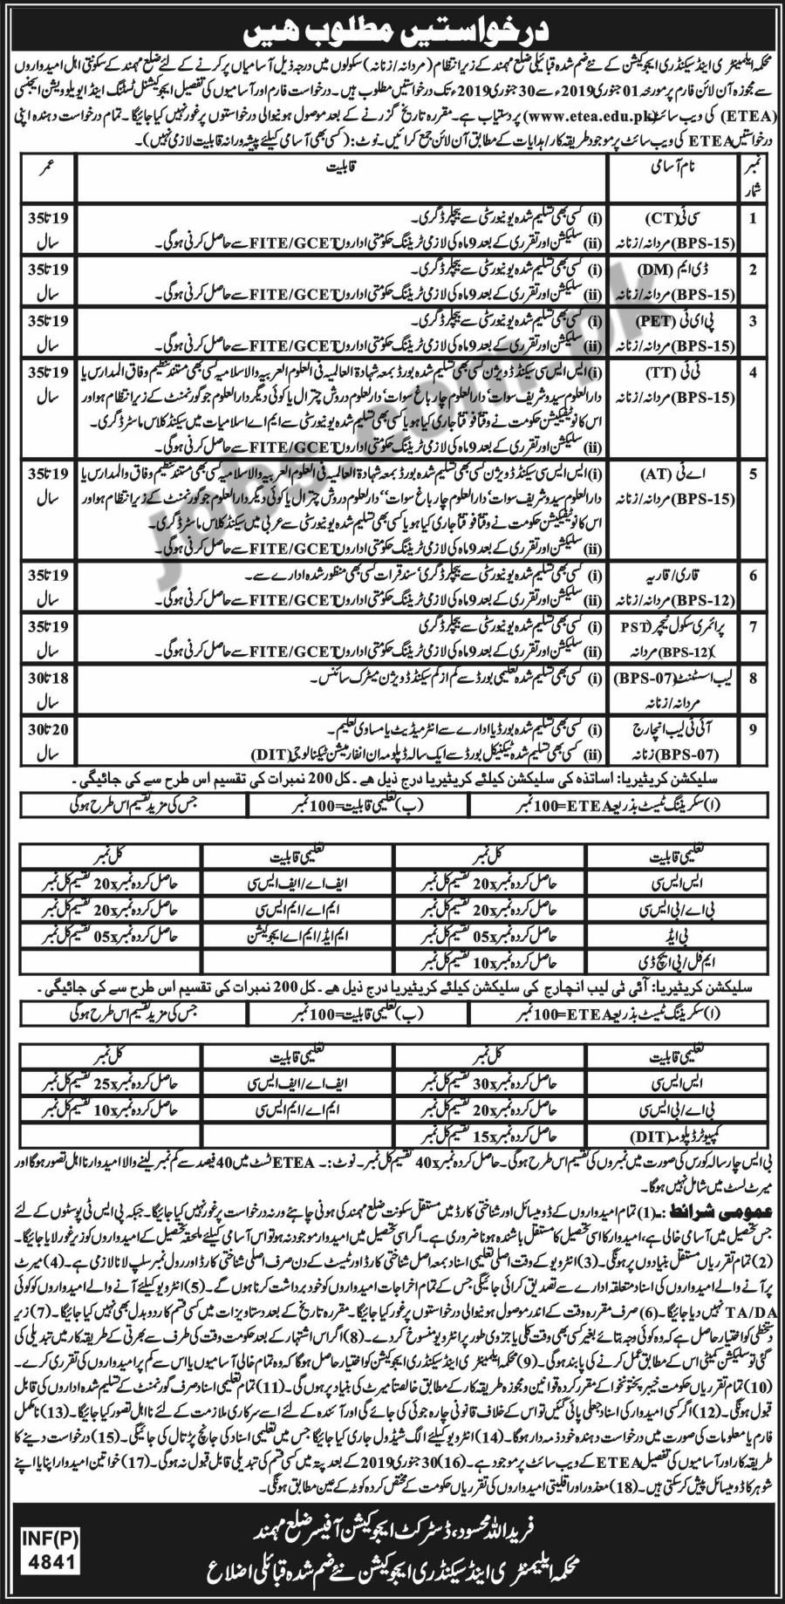 Elementary & Secondary Education Department KP (Mohmand) Jobs 2019 for Teachers, CT, DM, AT, TT, IT and Other Posts